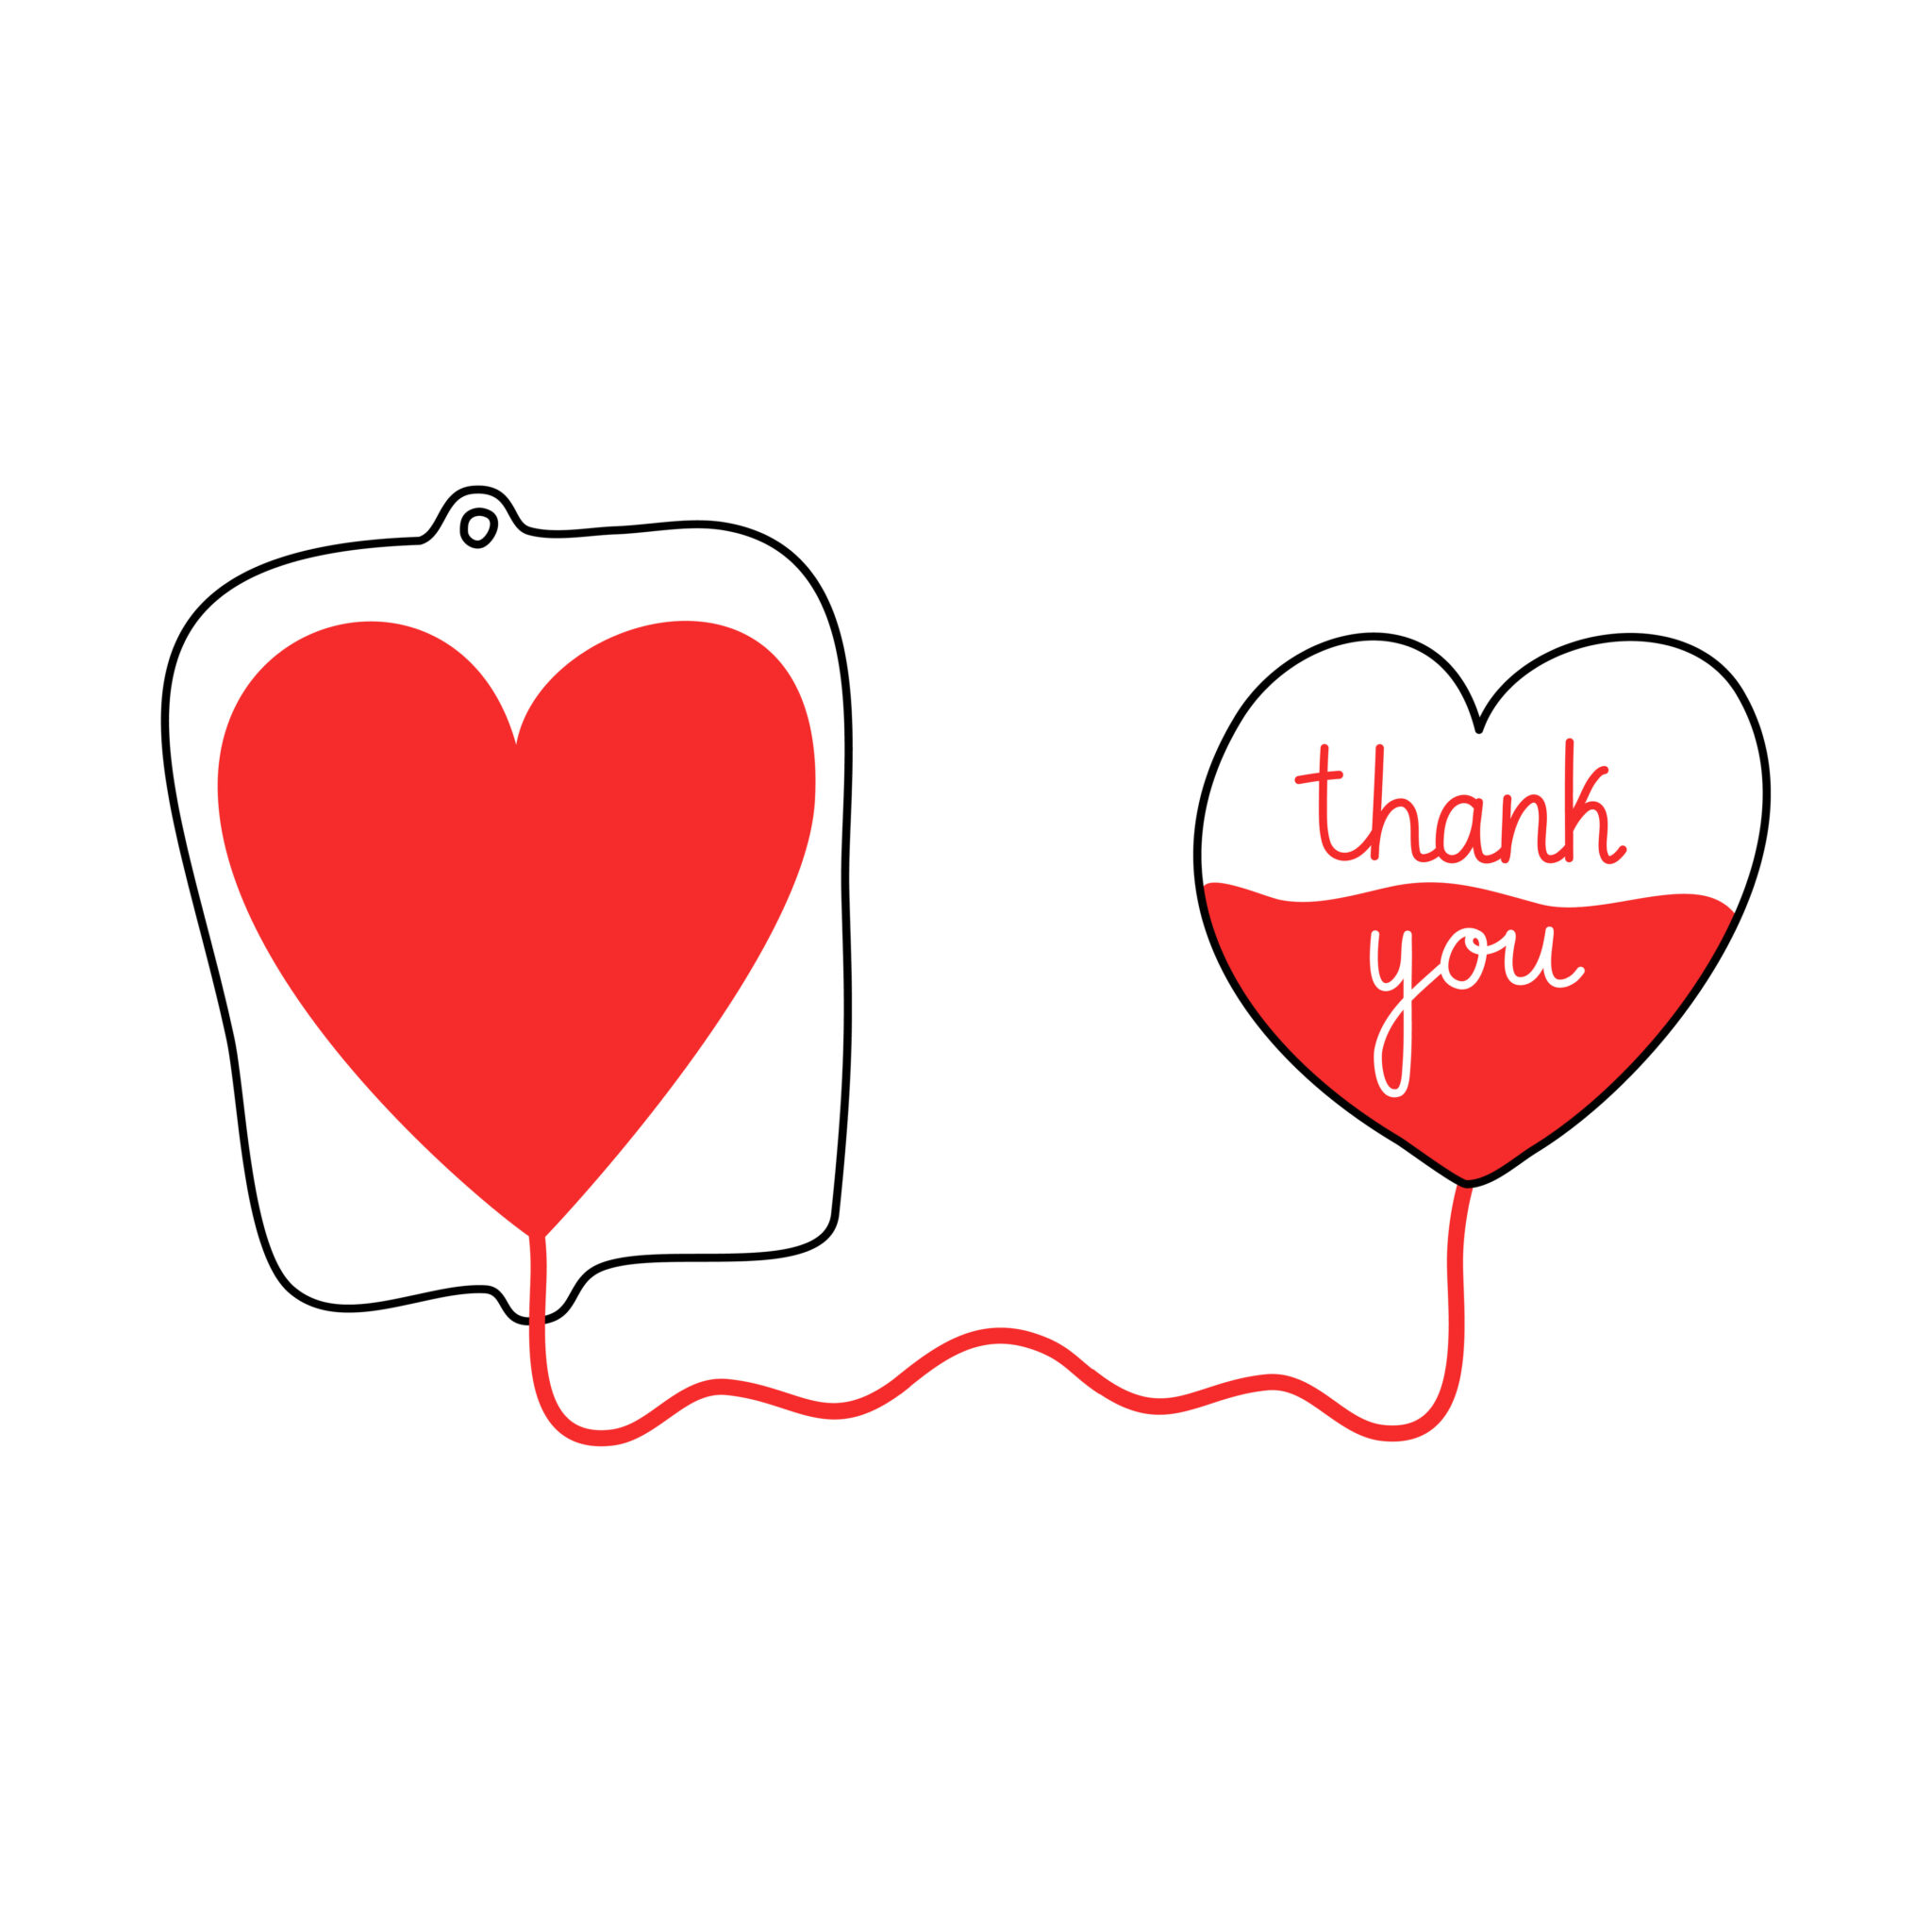 Donating blood through special bag and lettering thank you over white background vector illustration. Donors and blood giving concept